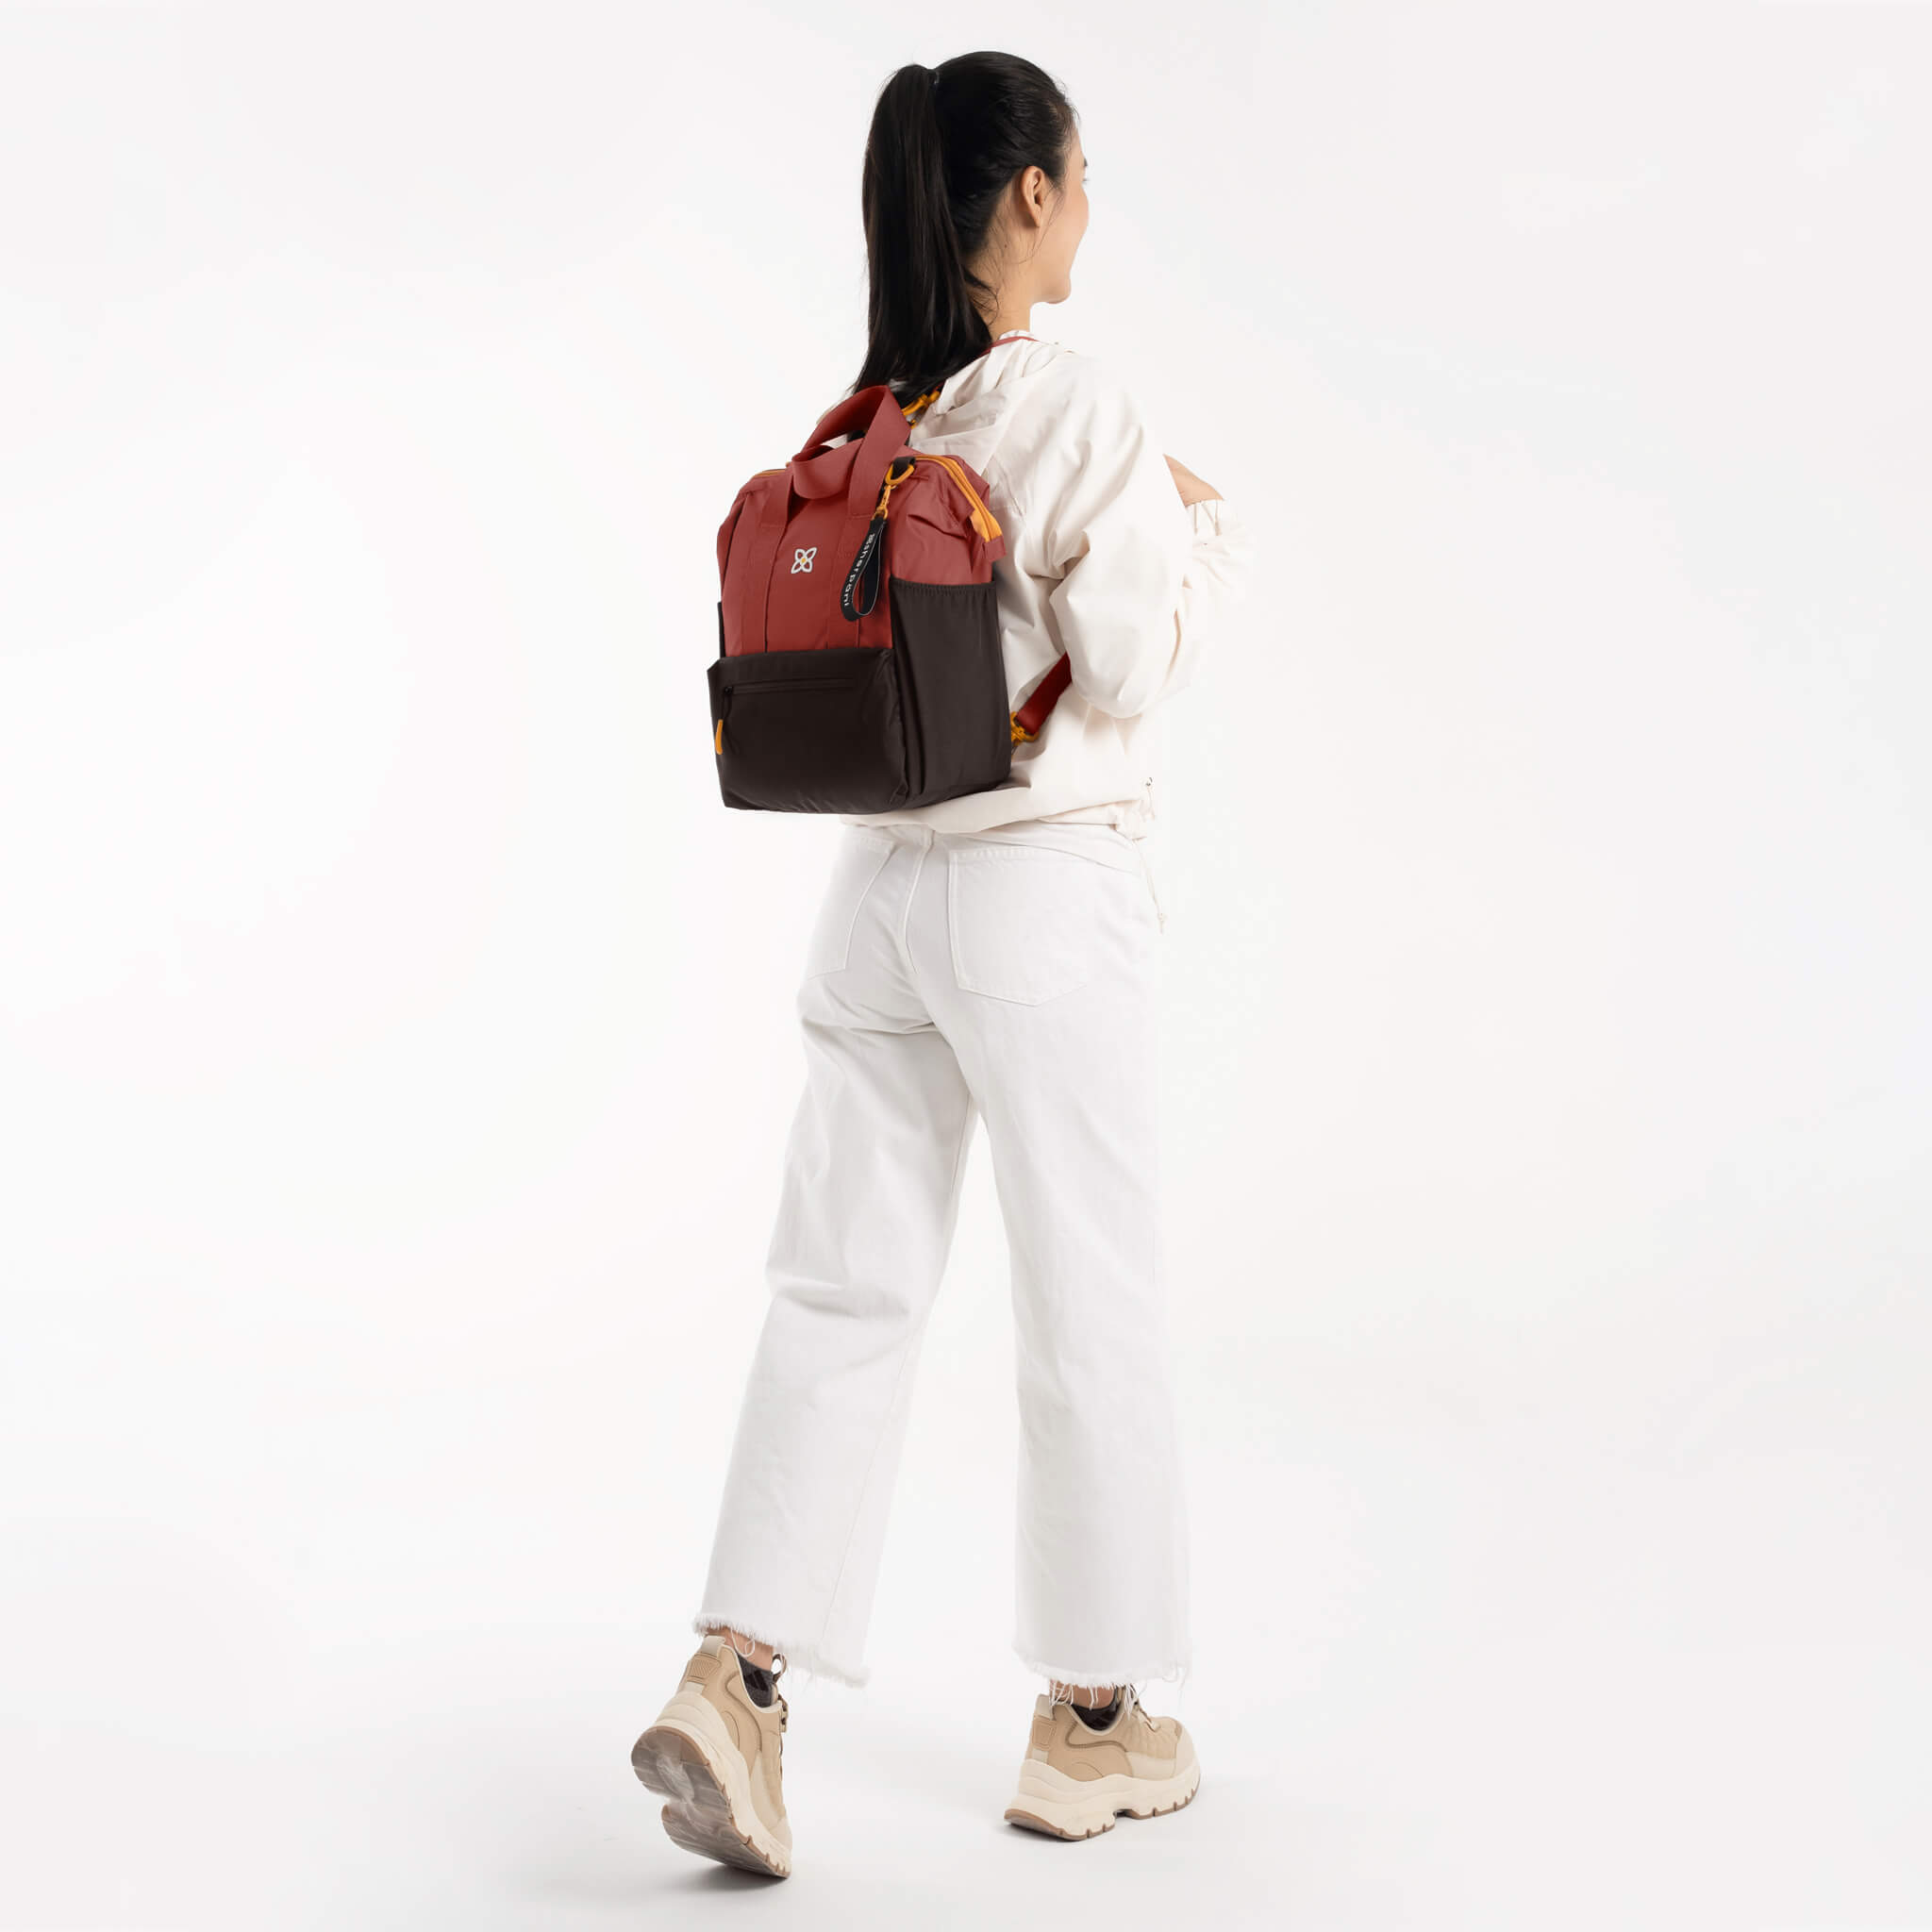 A model carrying Sherpani large travel purse, the Dispatch in Cider, with 3-in-one functionality as a tote bag, backpack and crossbody. 